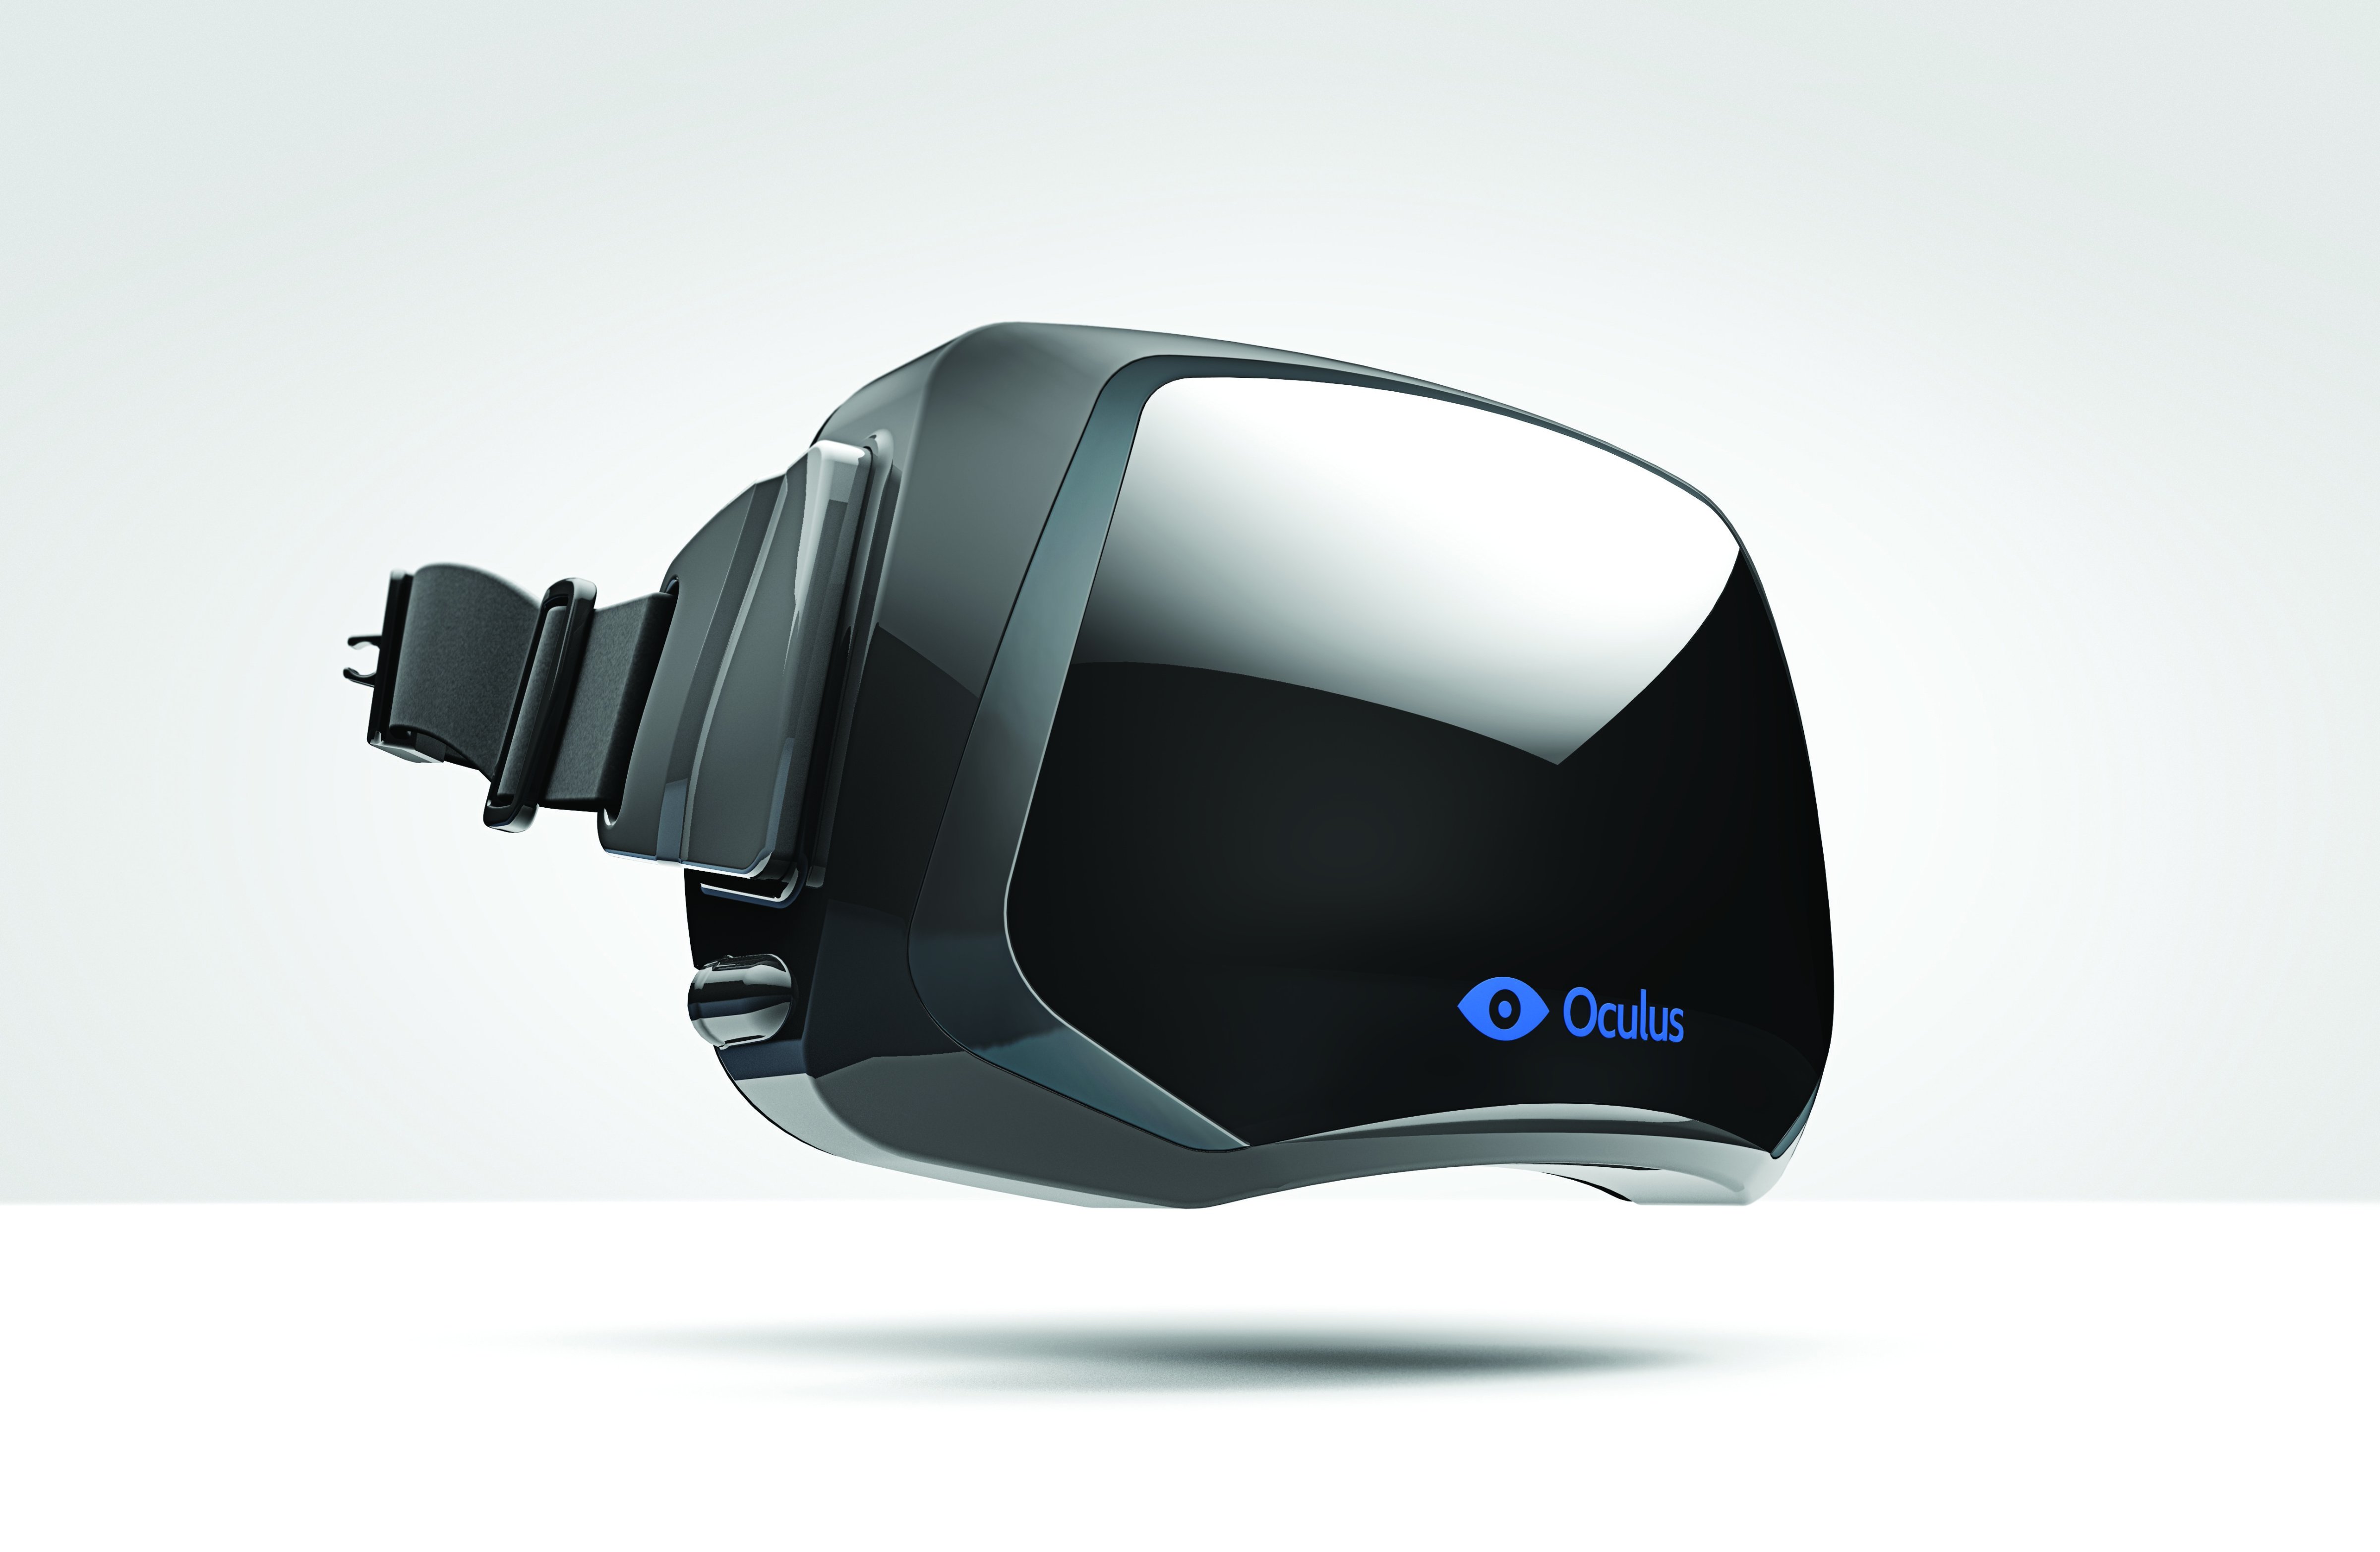 <strong>A whole new world</strong> An early prototype for the Oculus Rift, which raised $2.4 million on Kickstarter (Courtesy of Oculus VR)